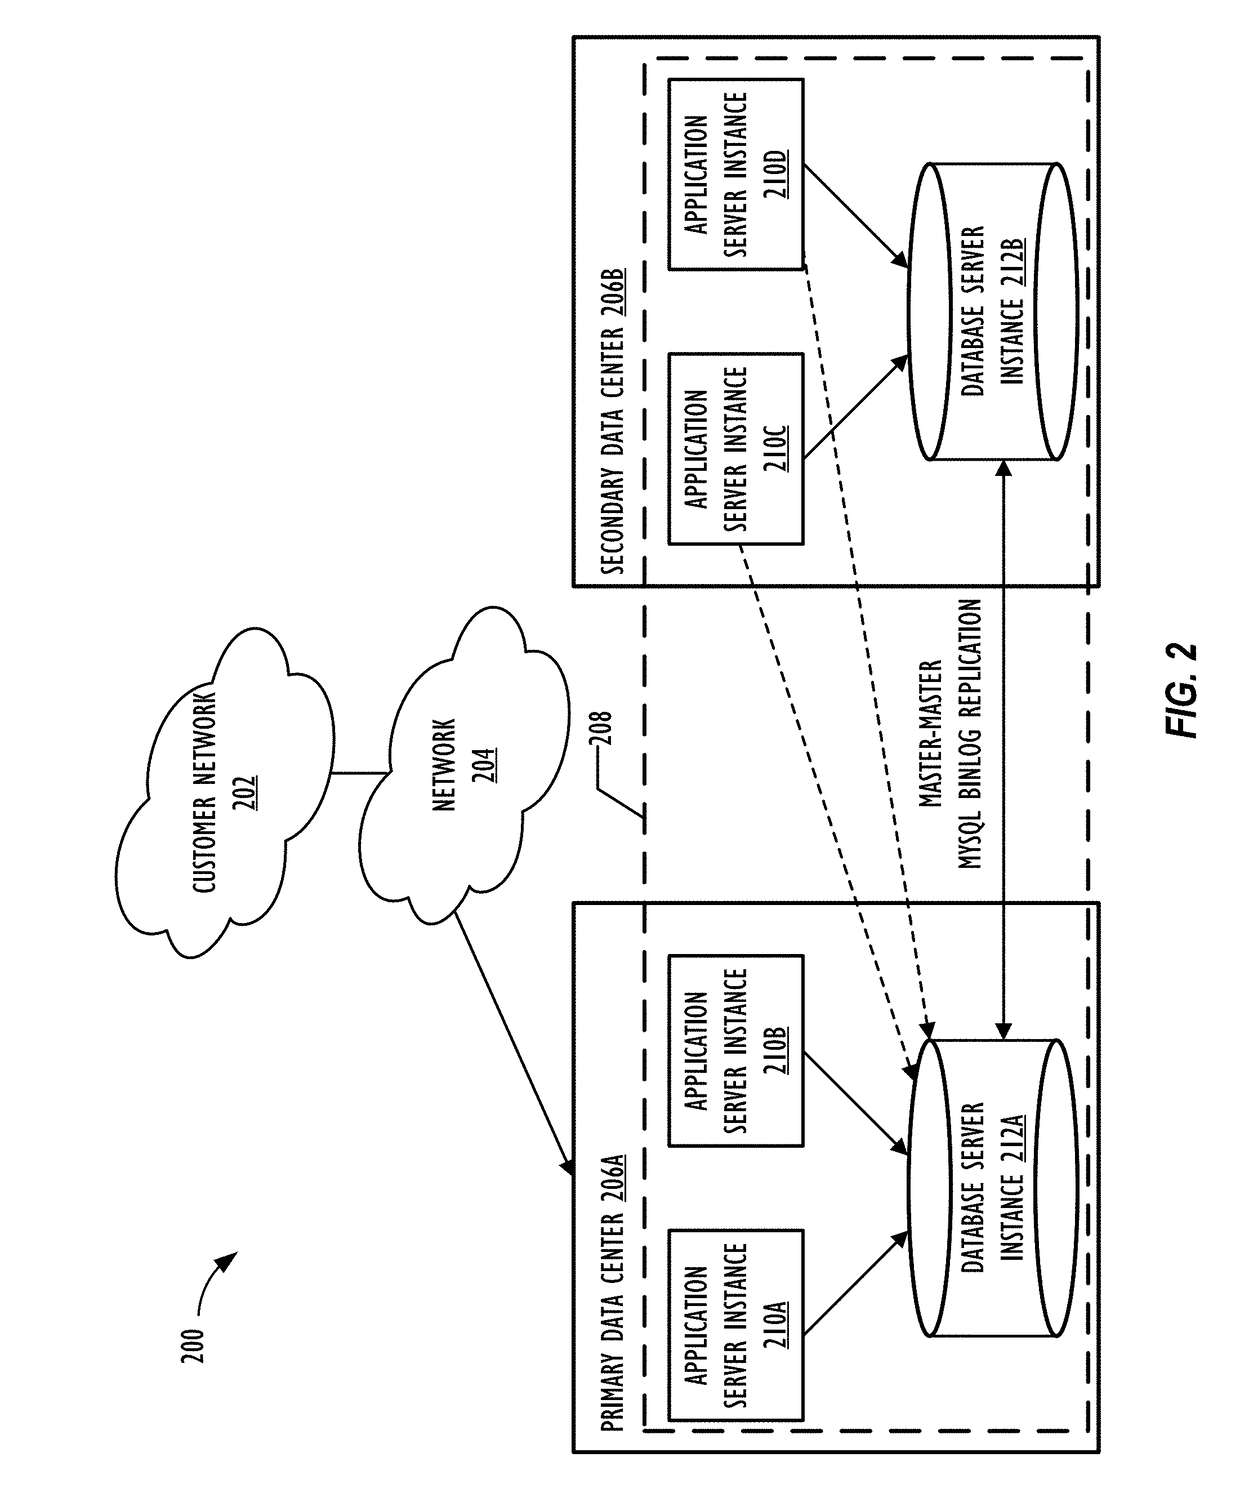 User interface for automated flows within a cloud based developmental platform